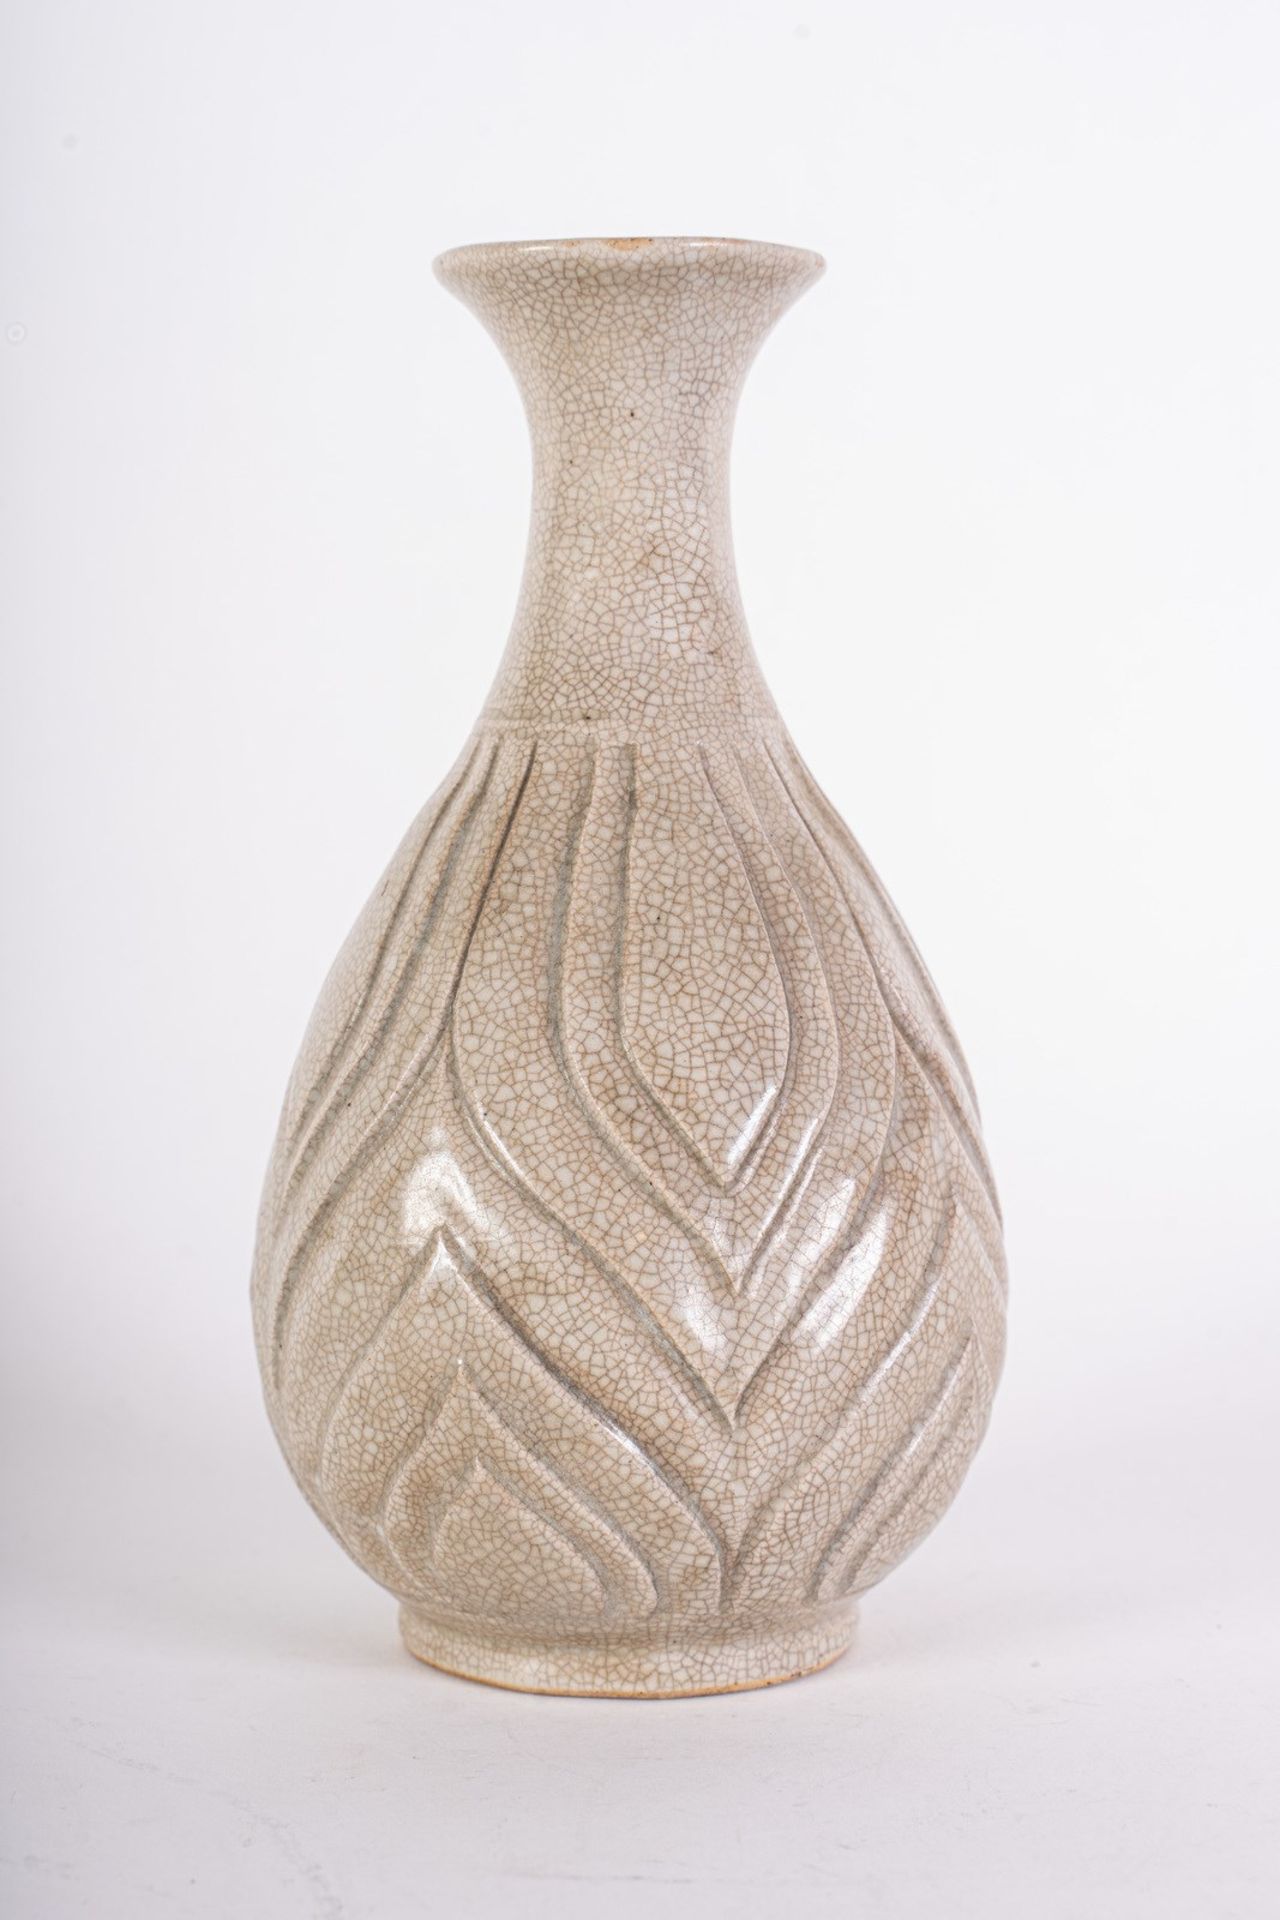 Arte Cinese A pottery baluster vase engraved with lotus flowers China, 19th century .